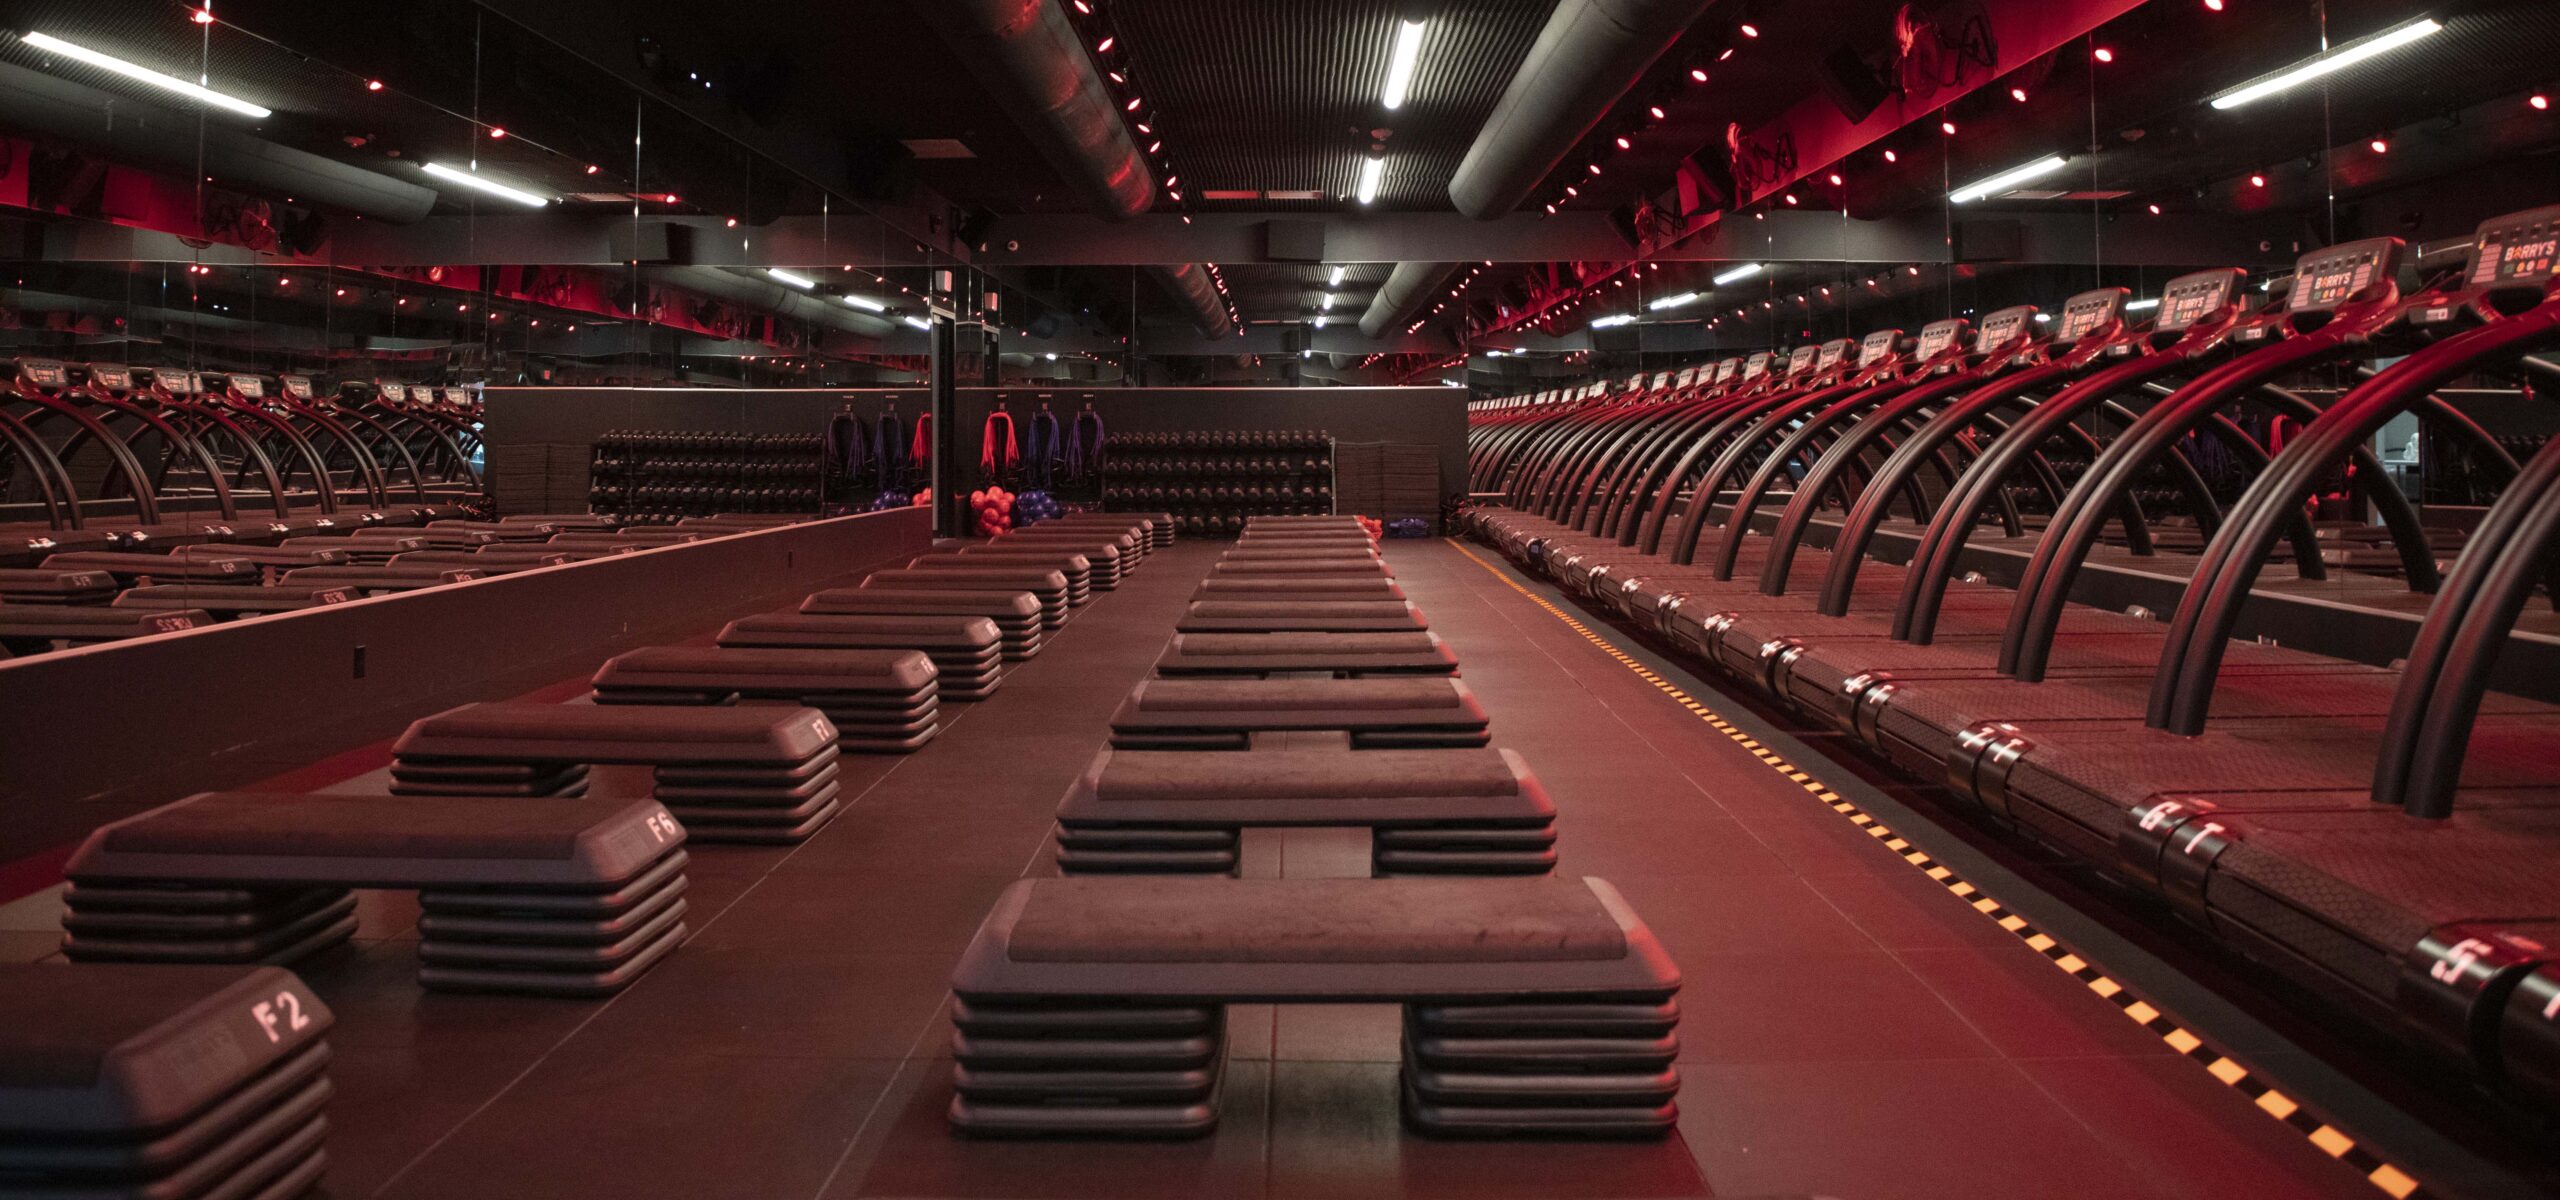 Interior photograph of a gym with rows of treadmills illuminated with red light.